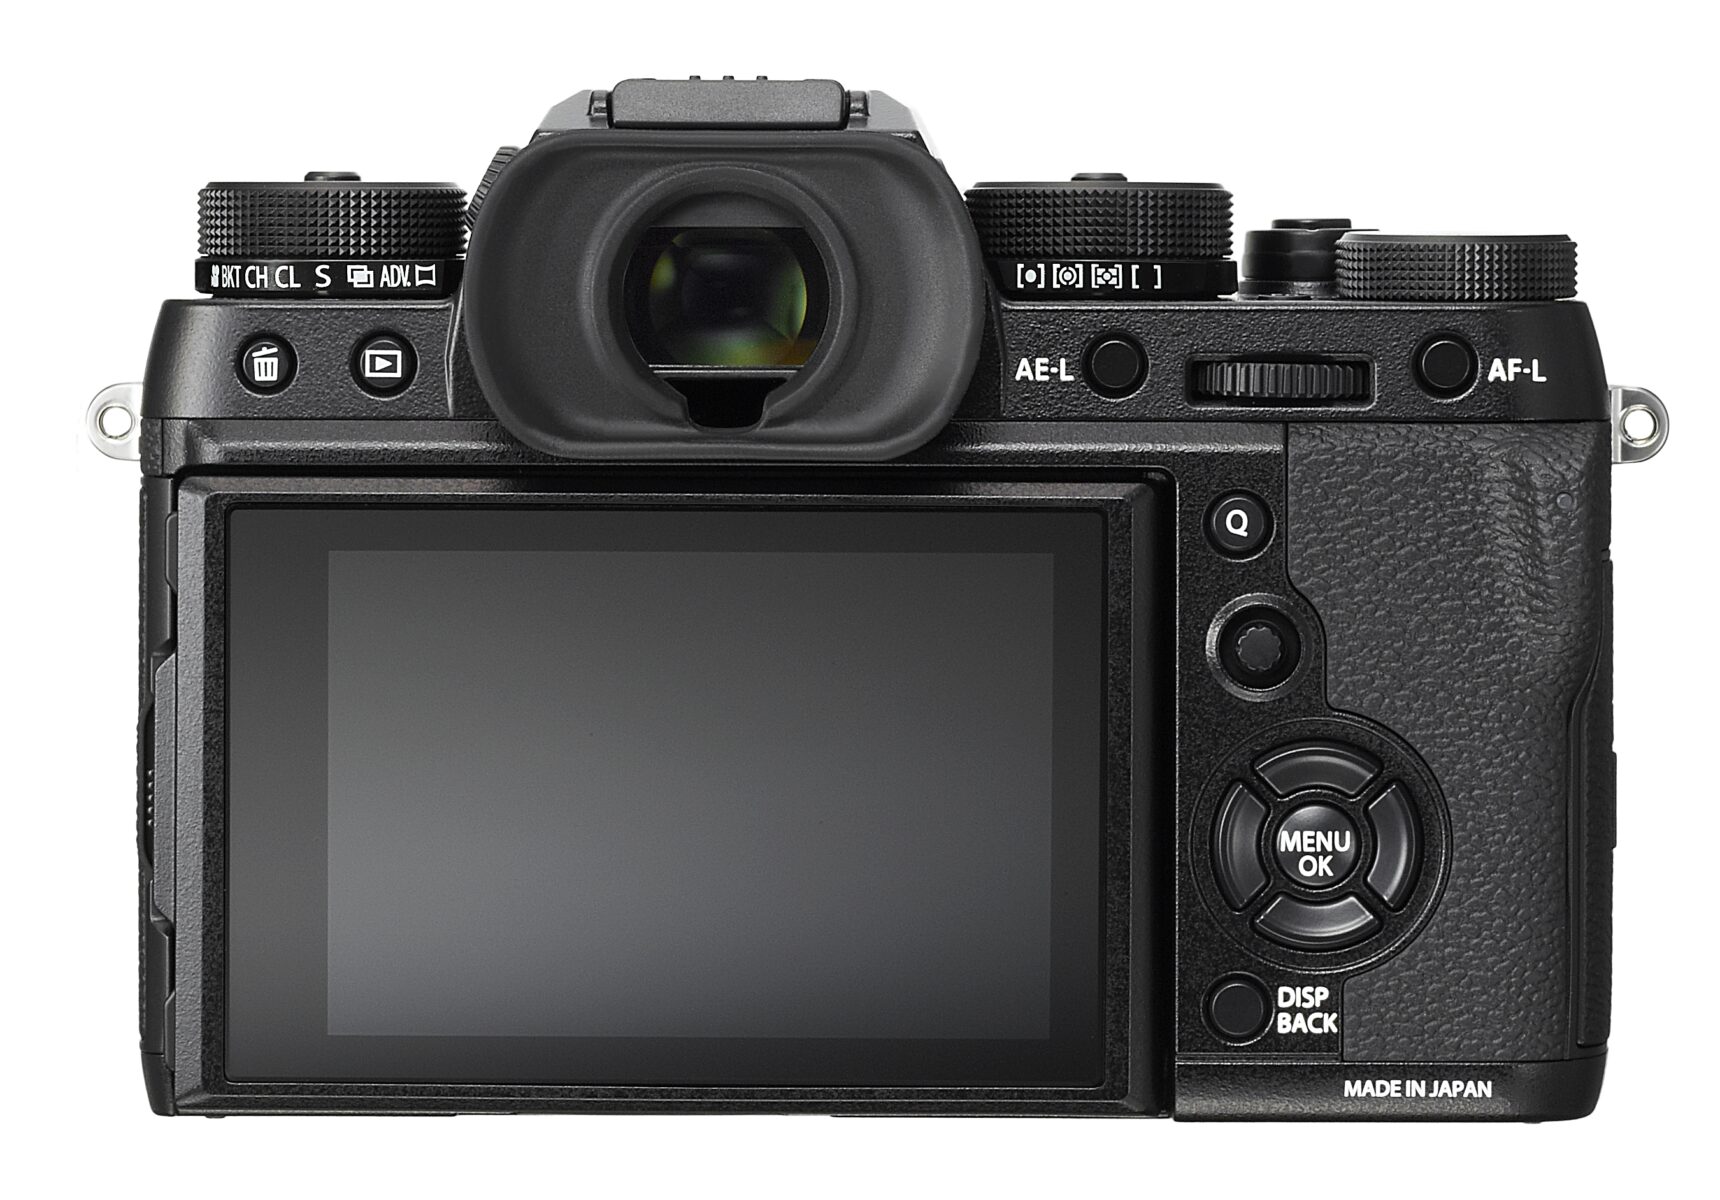 Fuji XT-2 Announced - Is More Betterer In Every Way